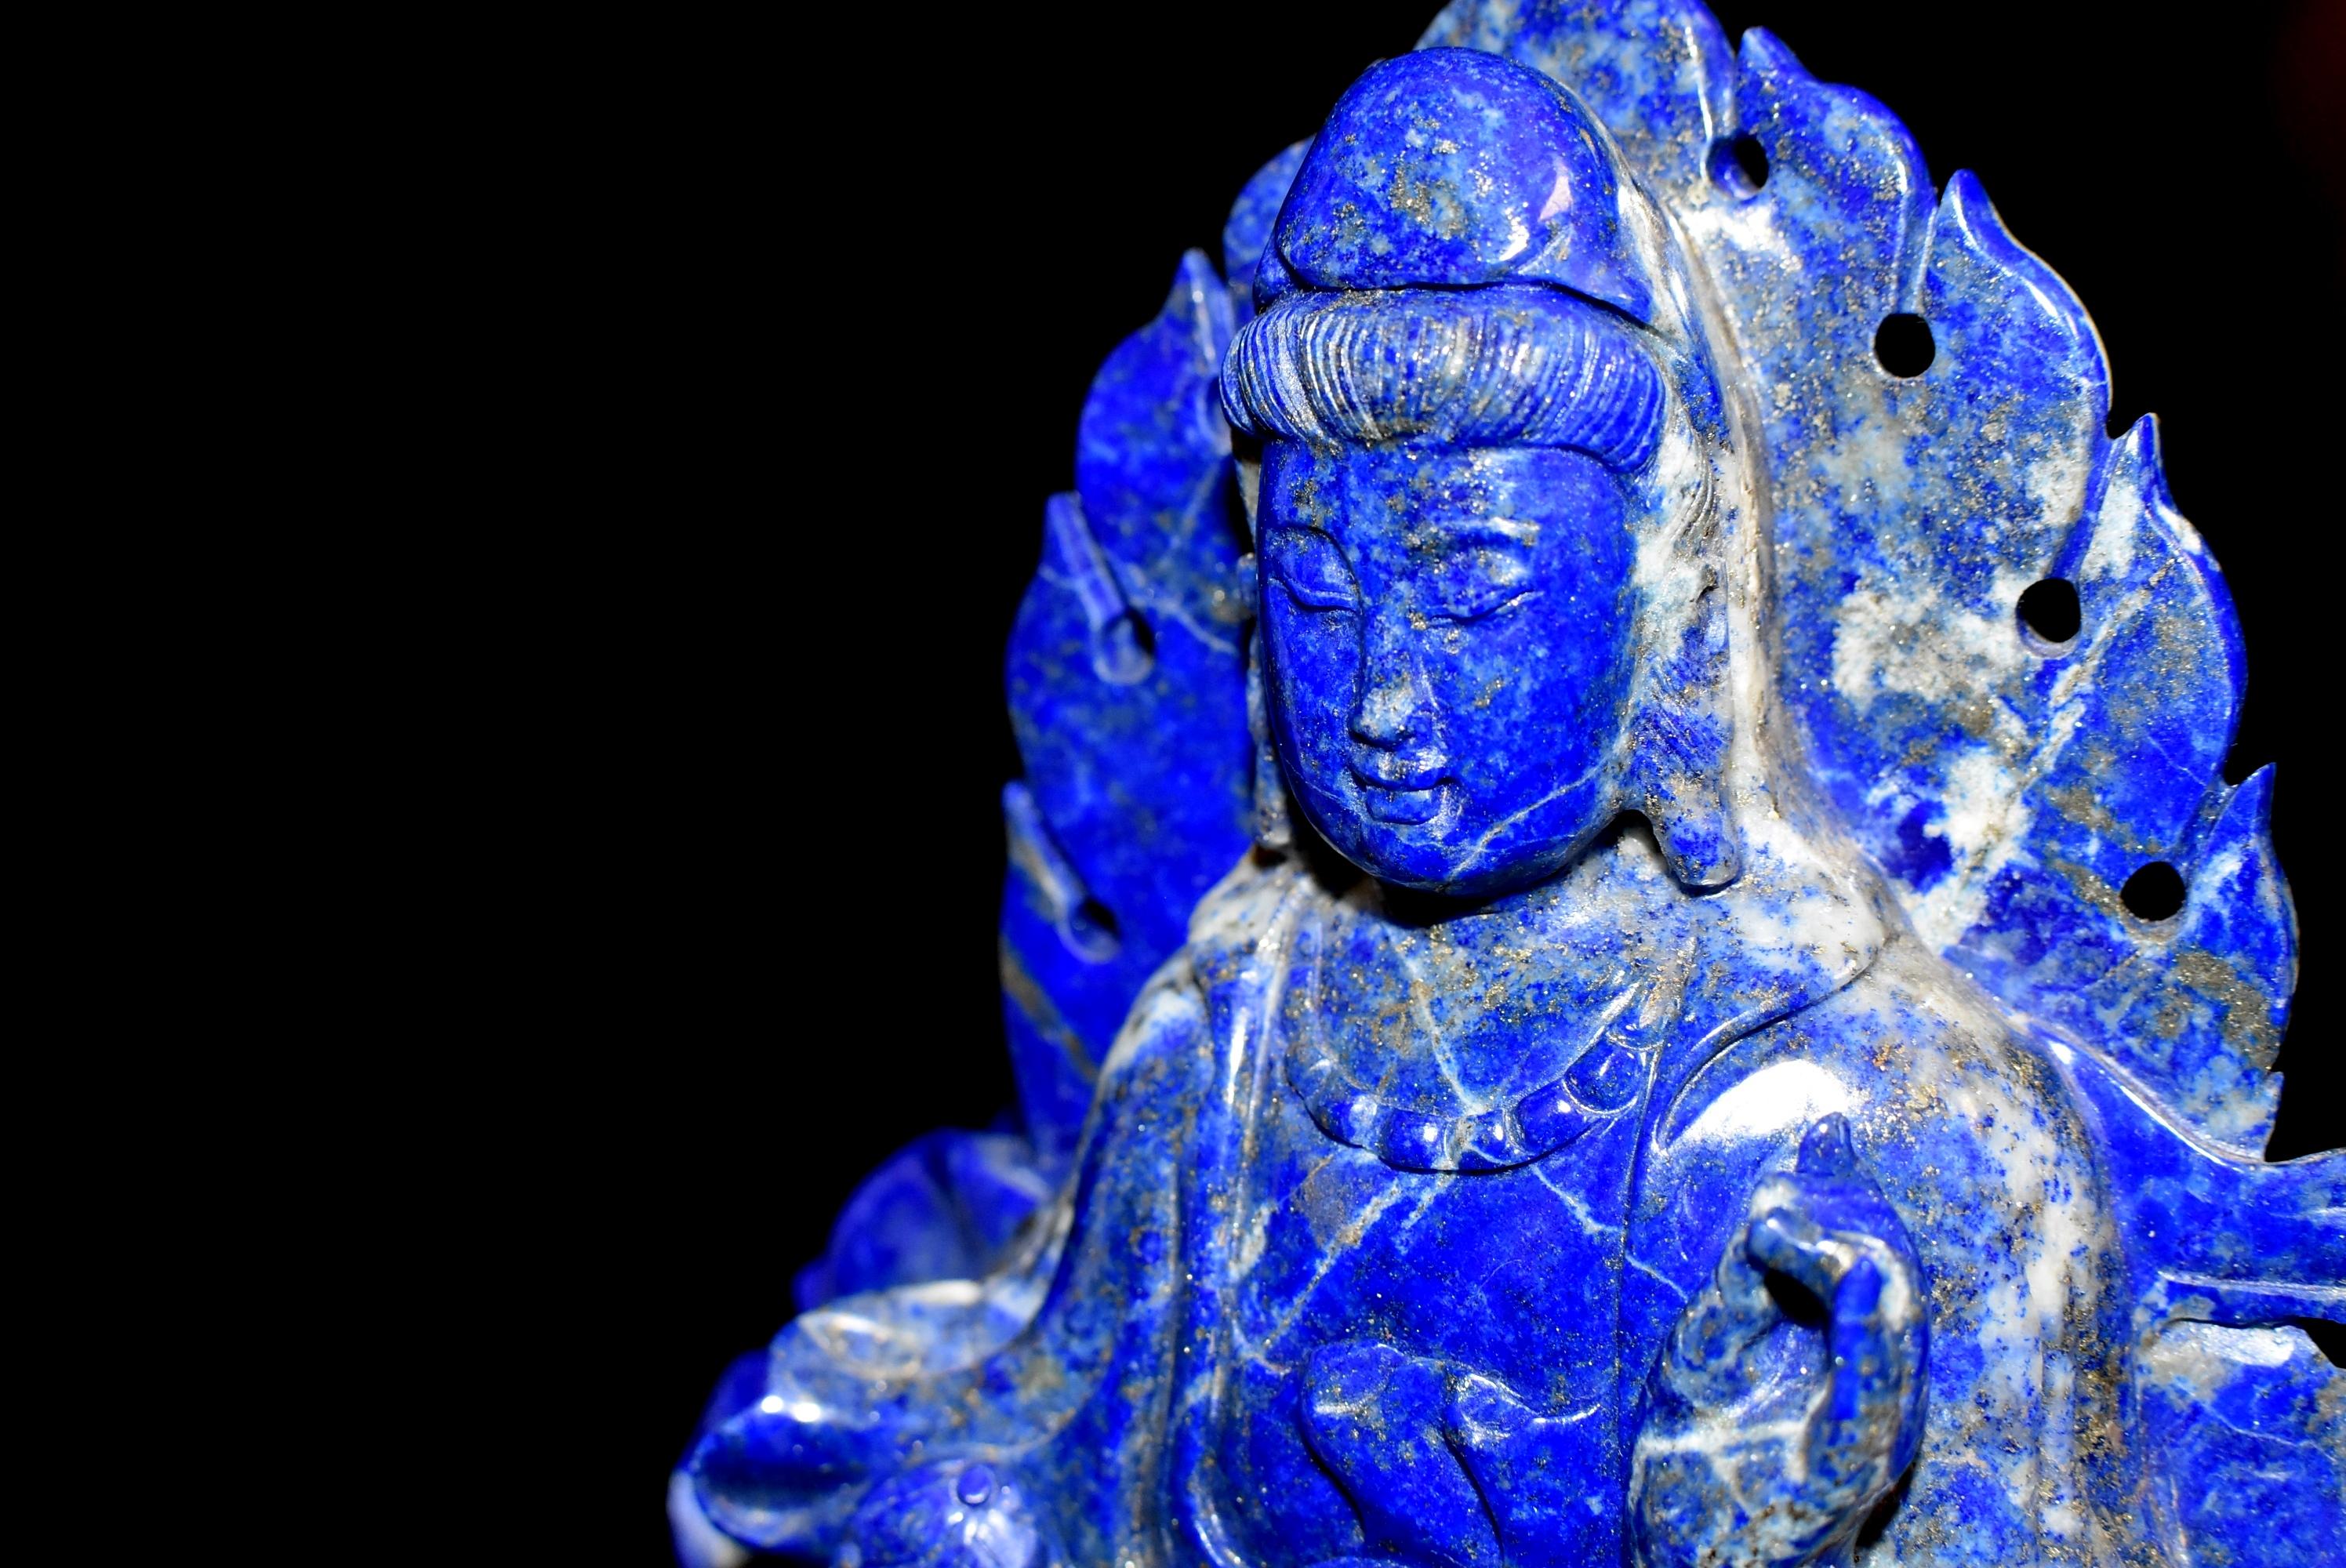 Afghan Natural Lapis Lazuli Statue of Guan Yin 6 lb Finest Grade For Sale